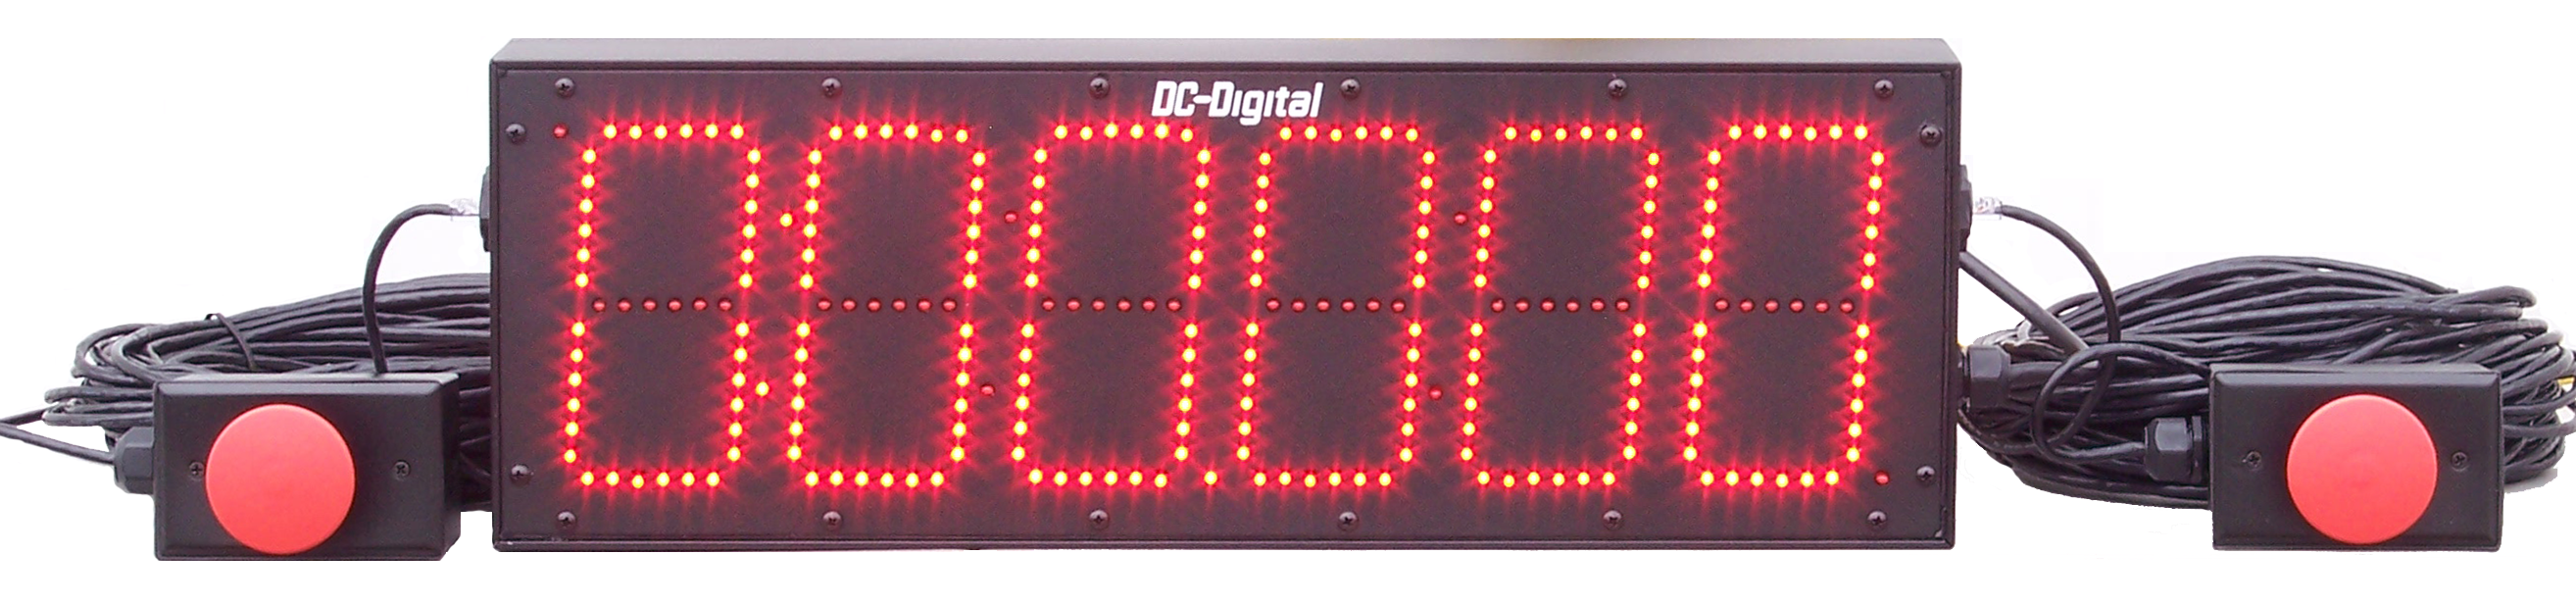 DC-Digital can Display thousandths of a second